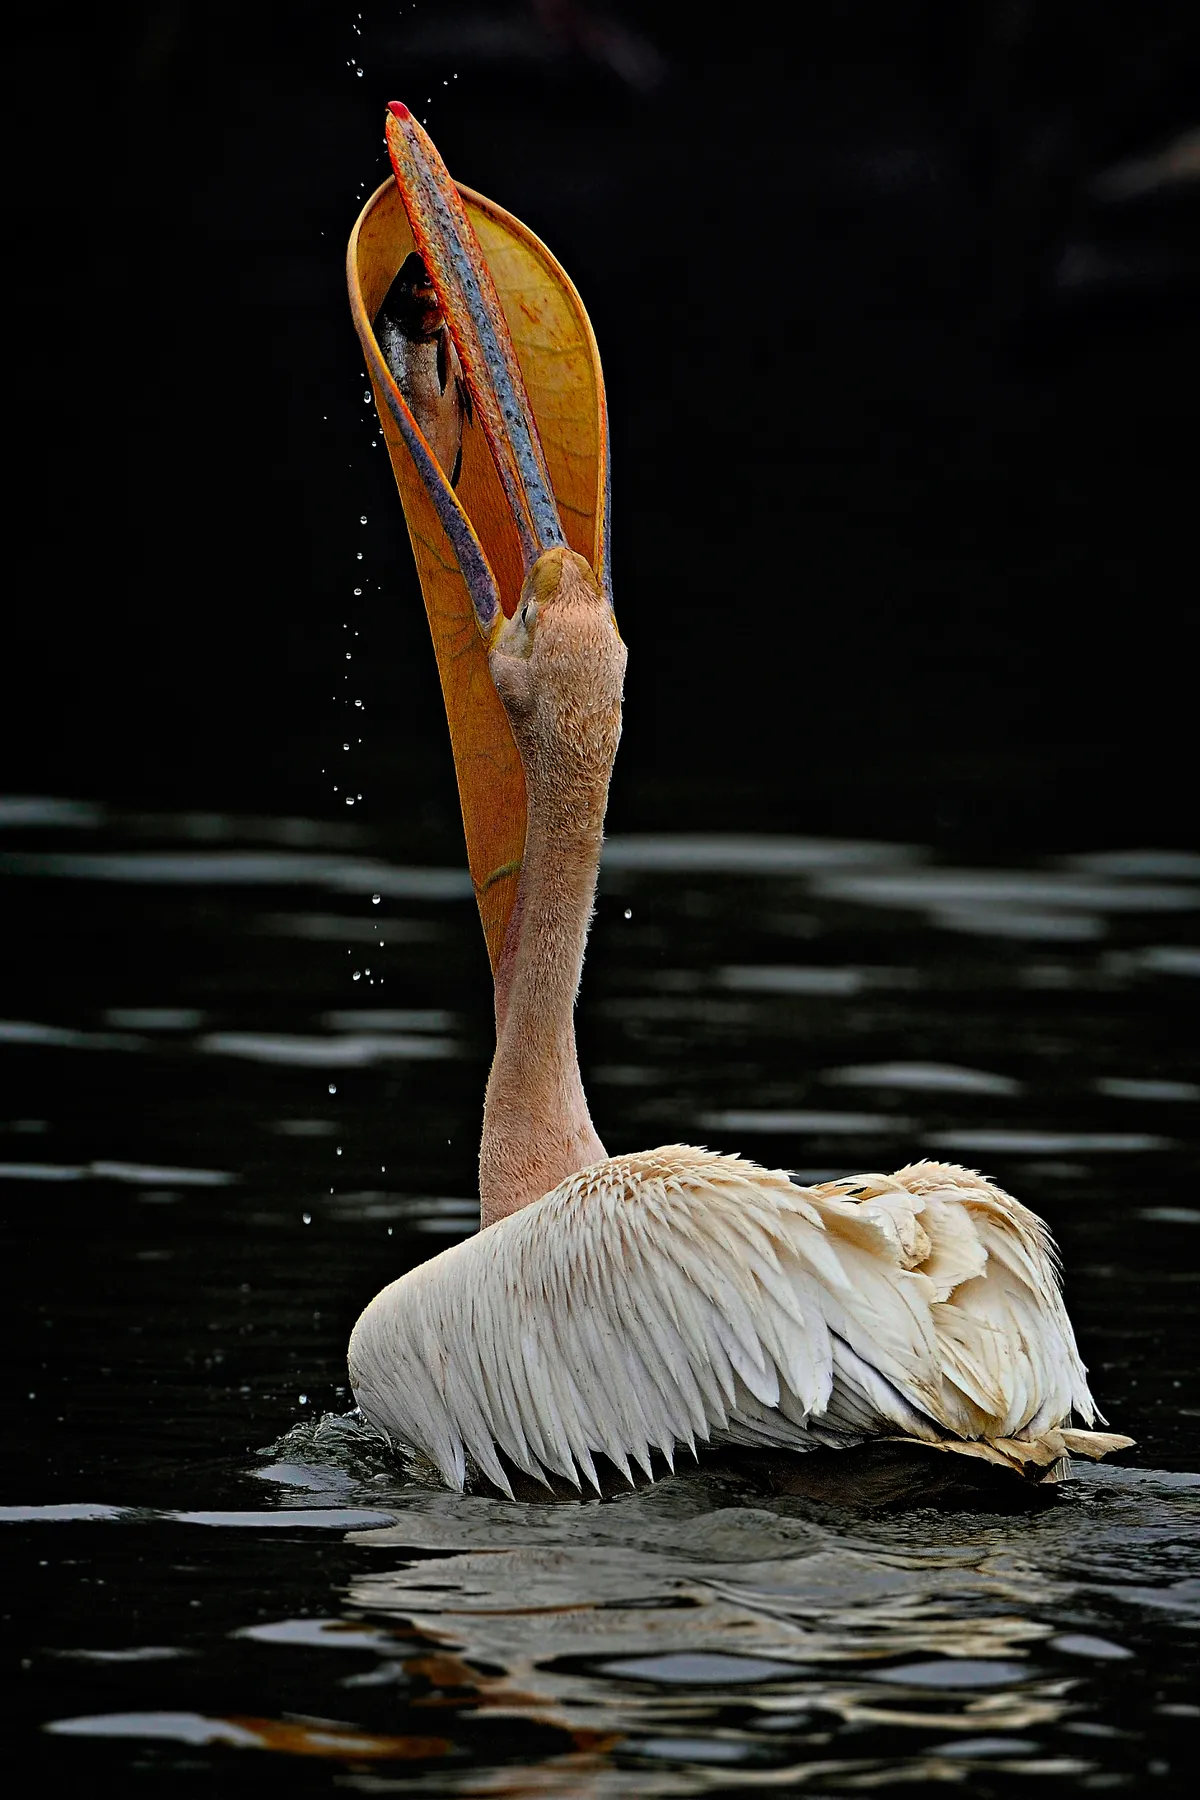 Back profile of a great white pelican which was fishing. Fish is the staple diet for these birds. They have a long beak and the stretchy pouch under it that helps them to scoop fish easily. © Rathika Ramasamy